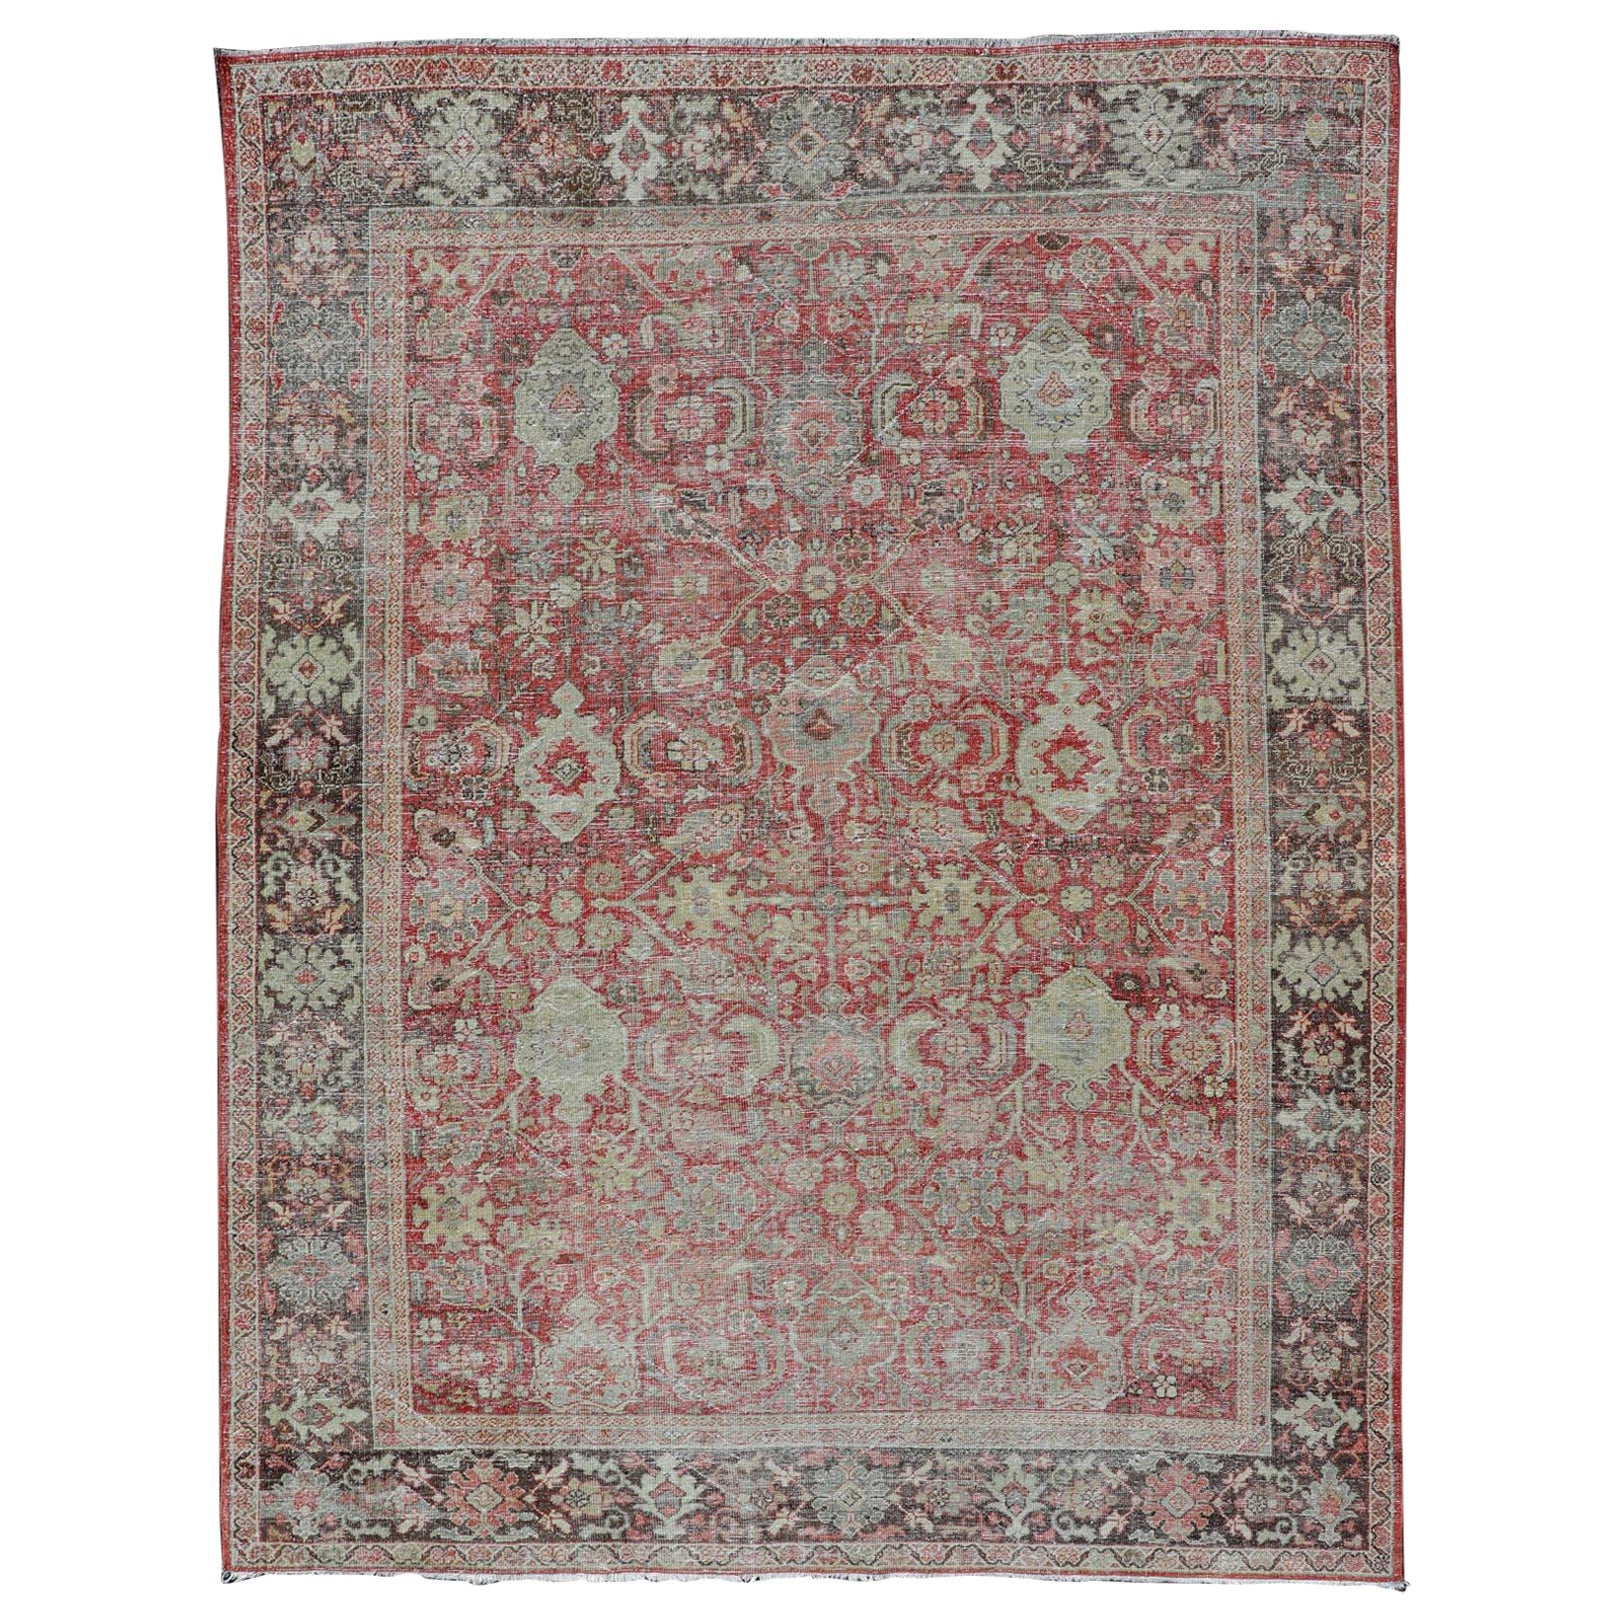 Antique Persian Colorful Mahal Rug with All over Floral Design on a Red Field 